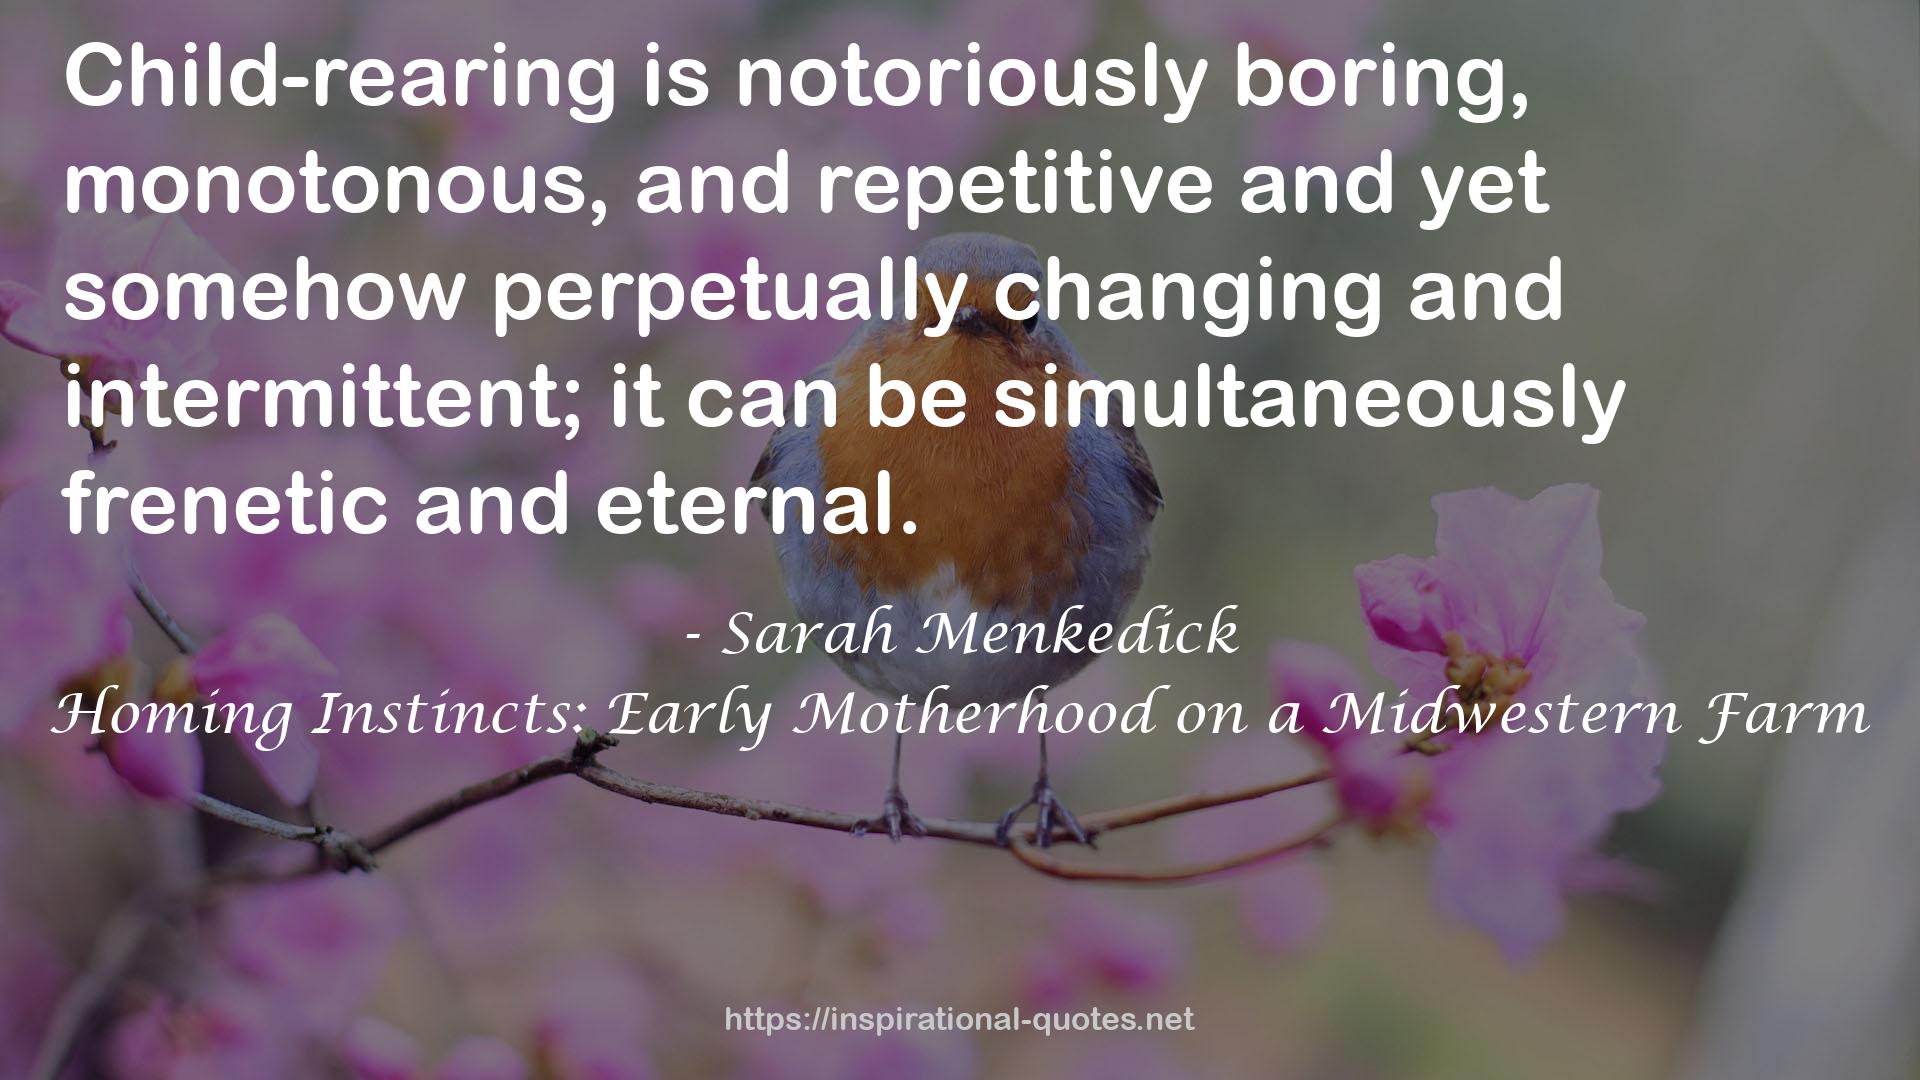 Homing Instincts: Early Motherhood on a Midwestern Farm QUOTES